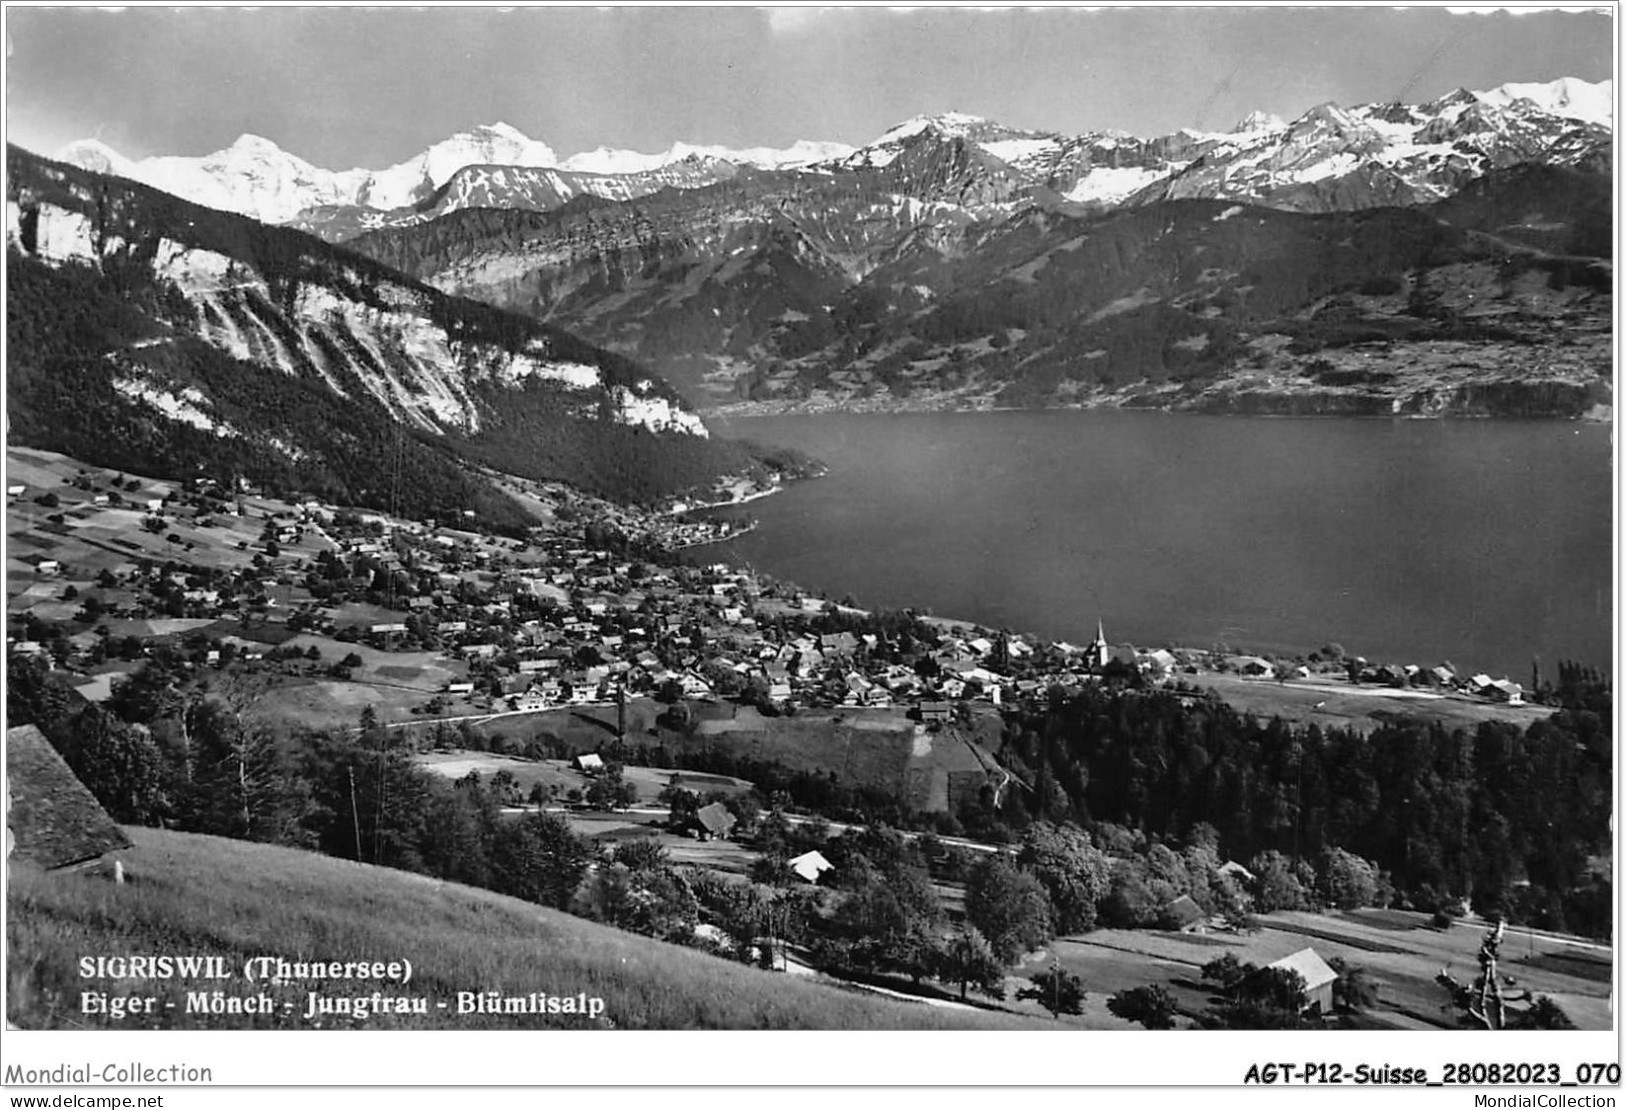 AGTP12-0904-SUISSE - SIGRISWIL - THUNERSEE - Eiger, Monch, Jungfrau, Blumlisalp - Thoune / Thun